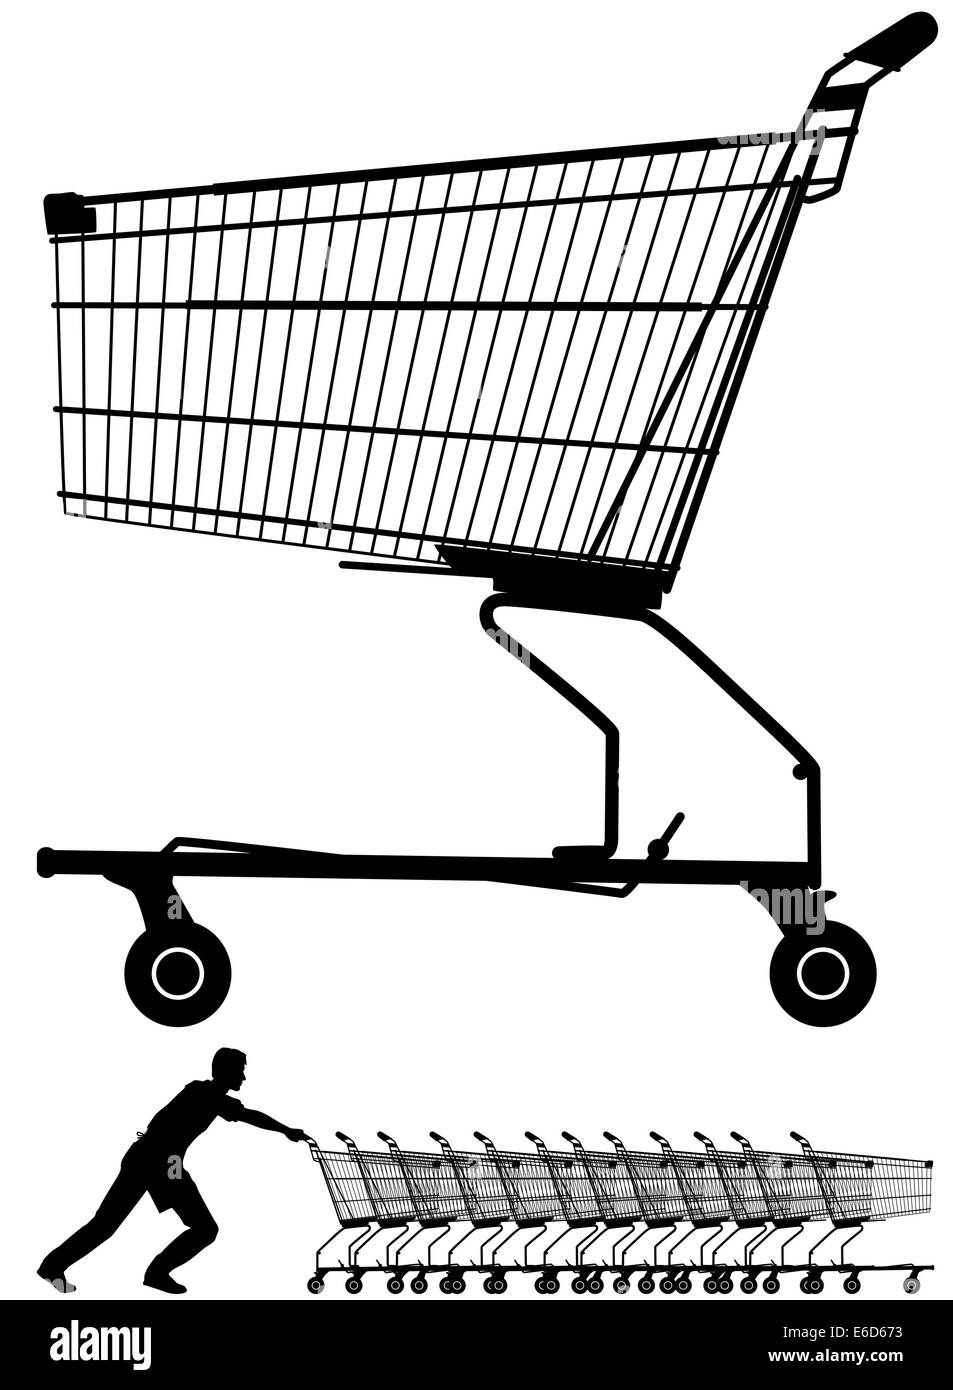 Editable vector illustration of a shopping trolley silhouette plus a ...